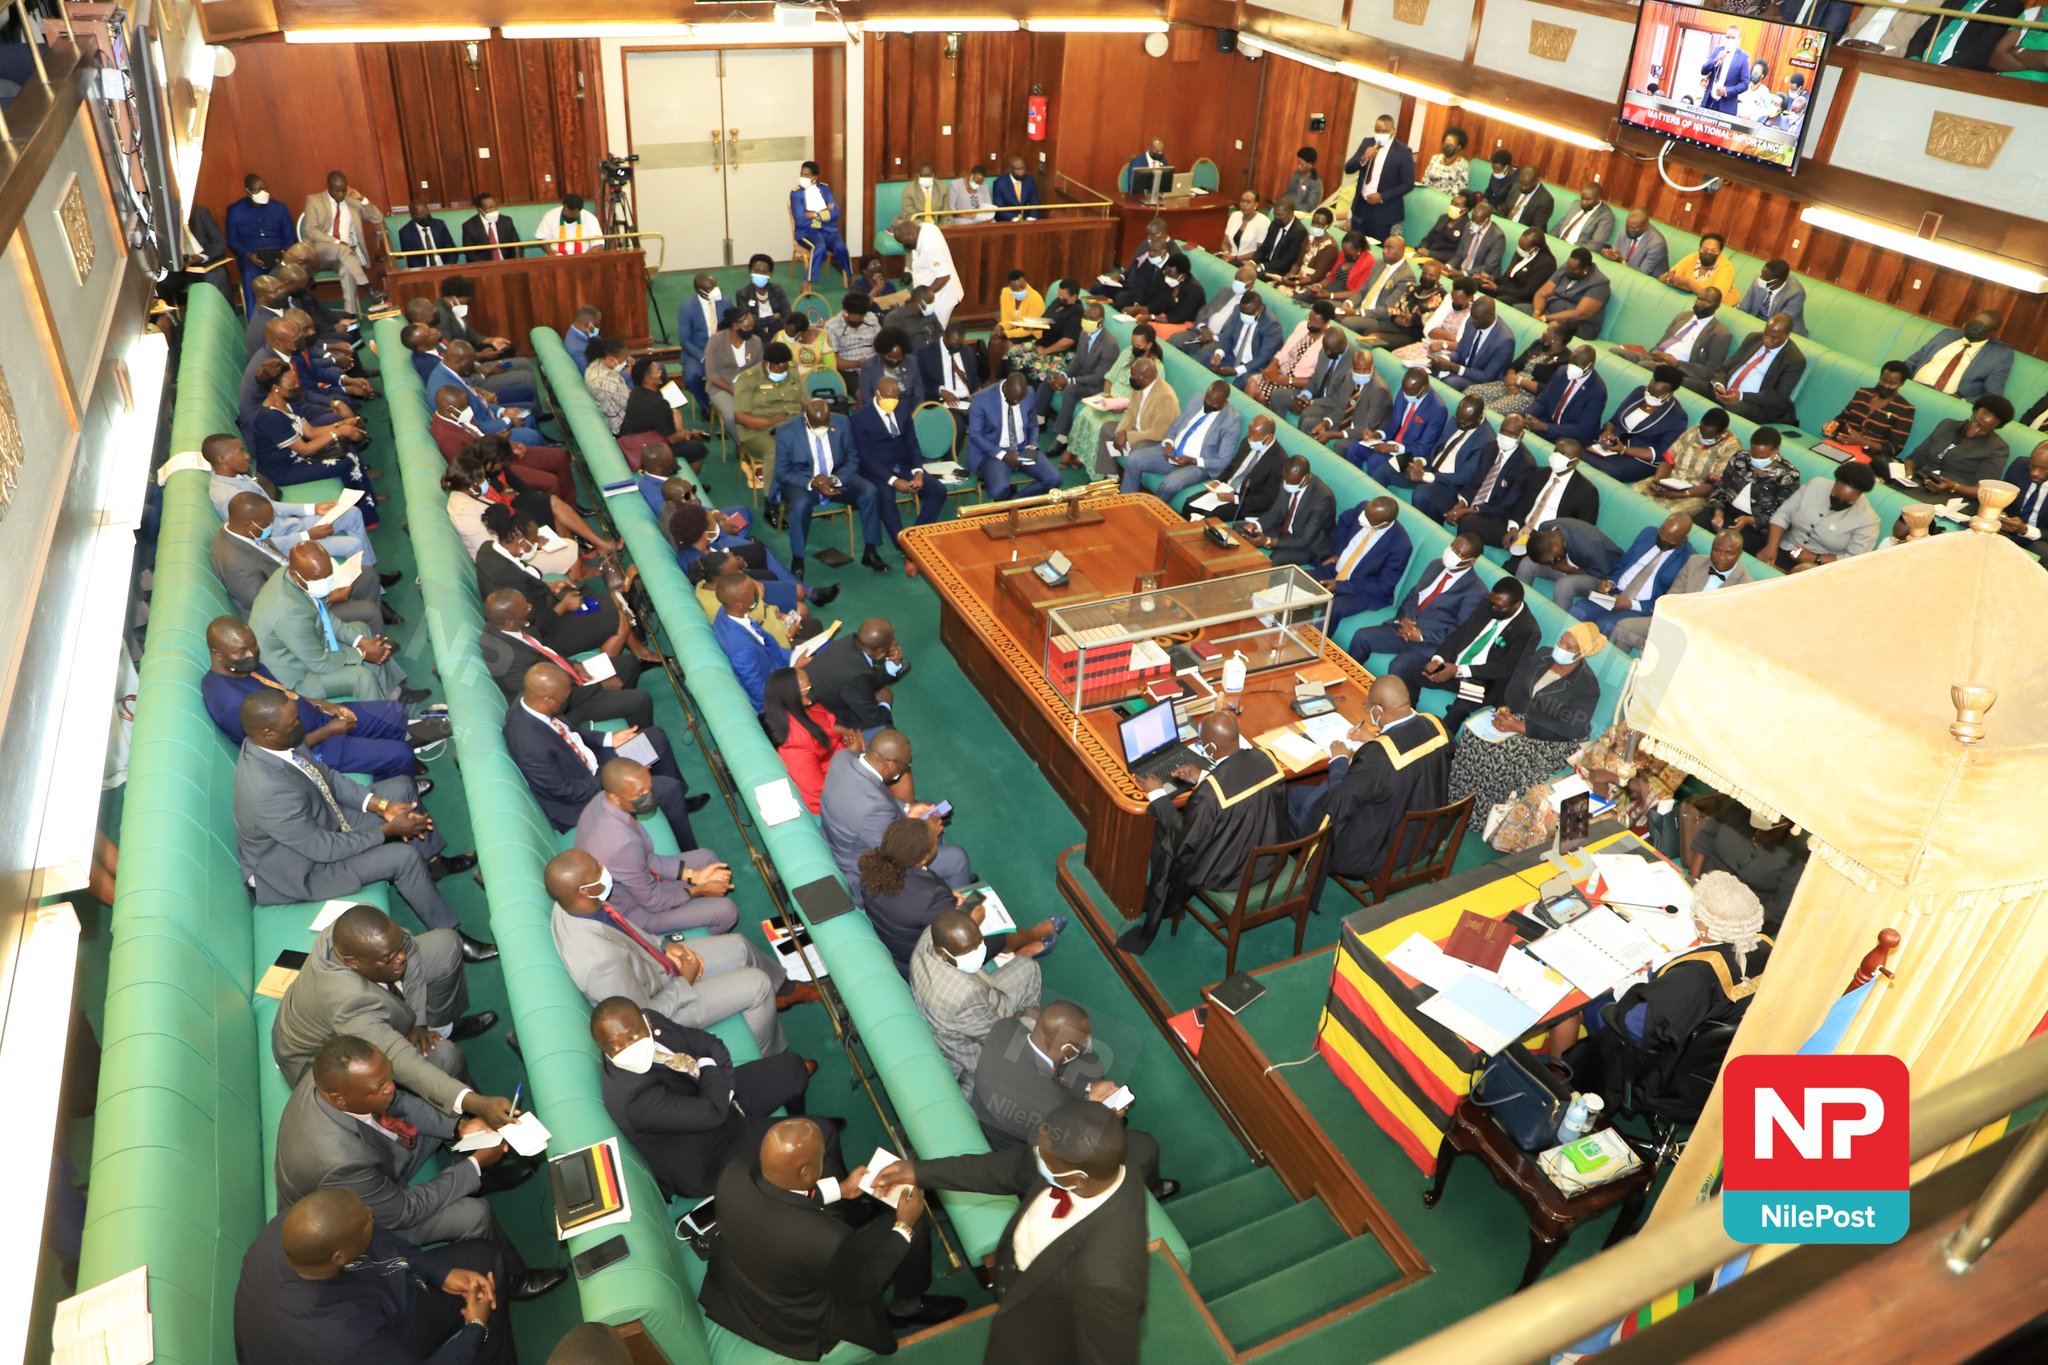 The vital role of Parliament in vetting presidential appointees